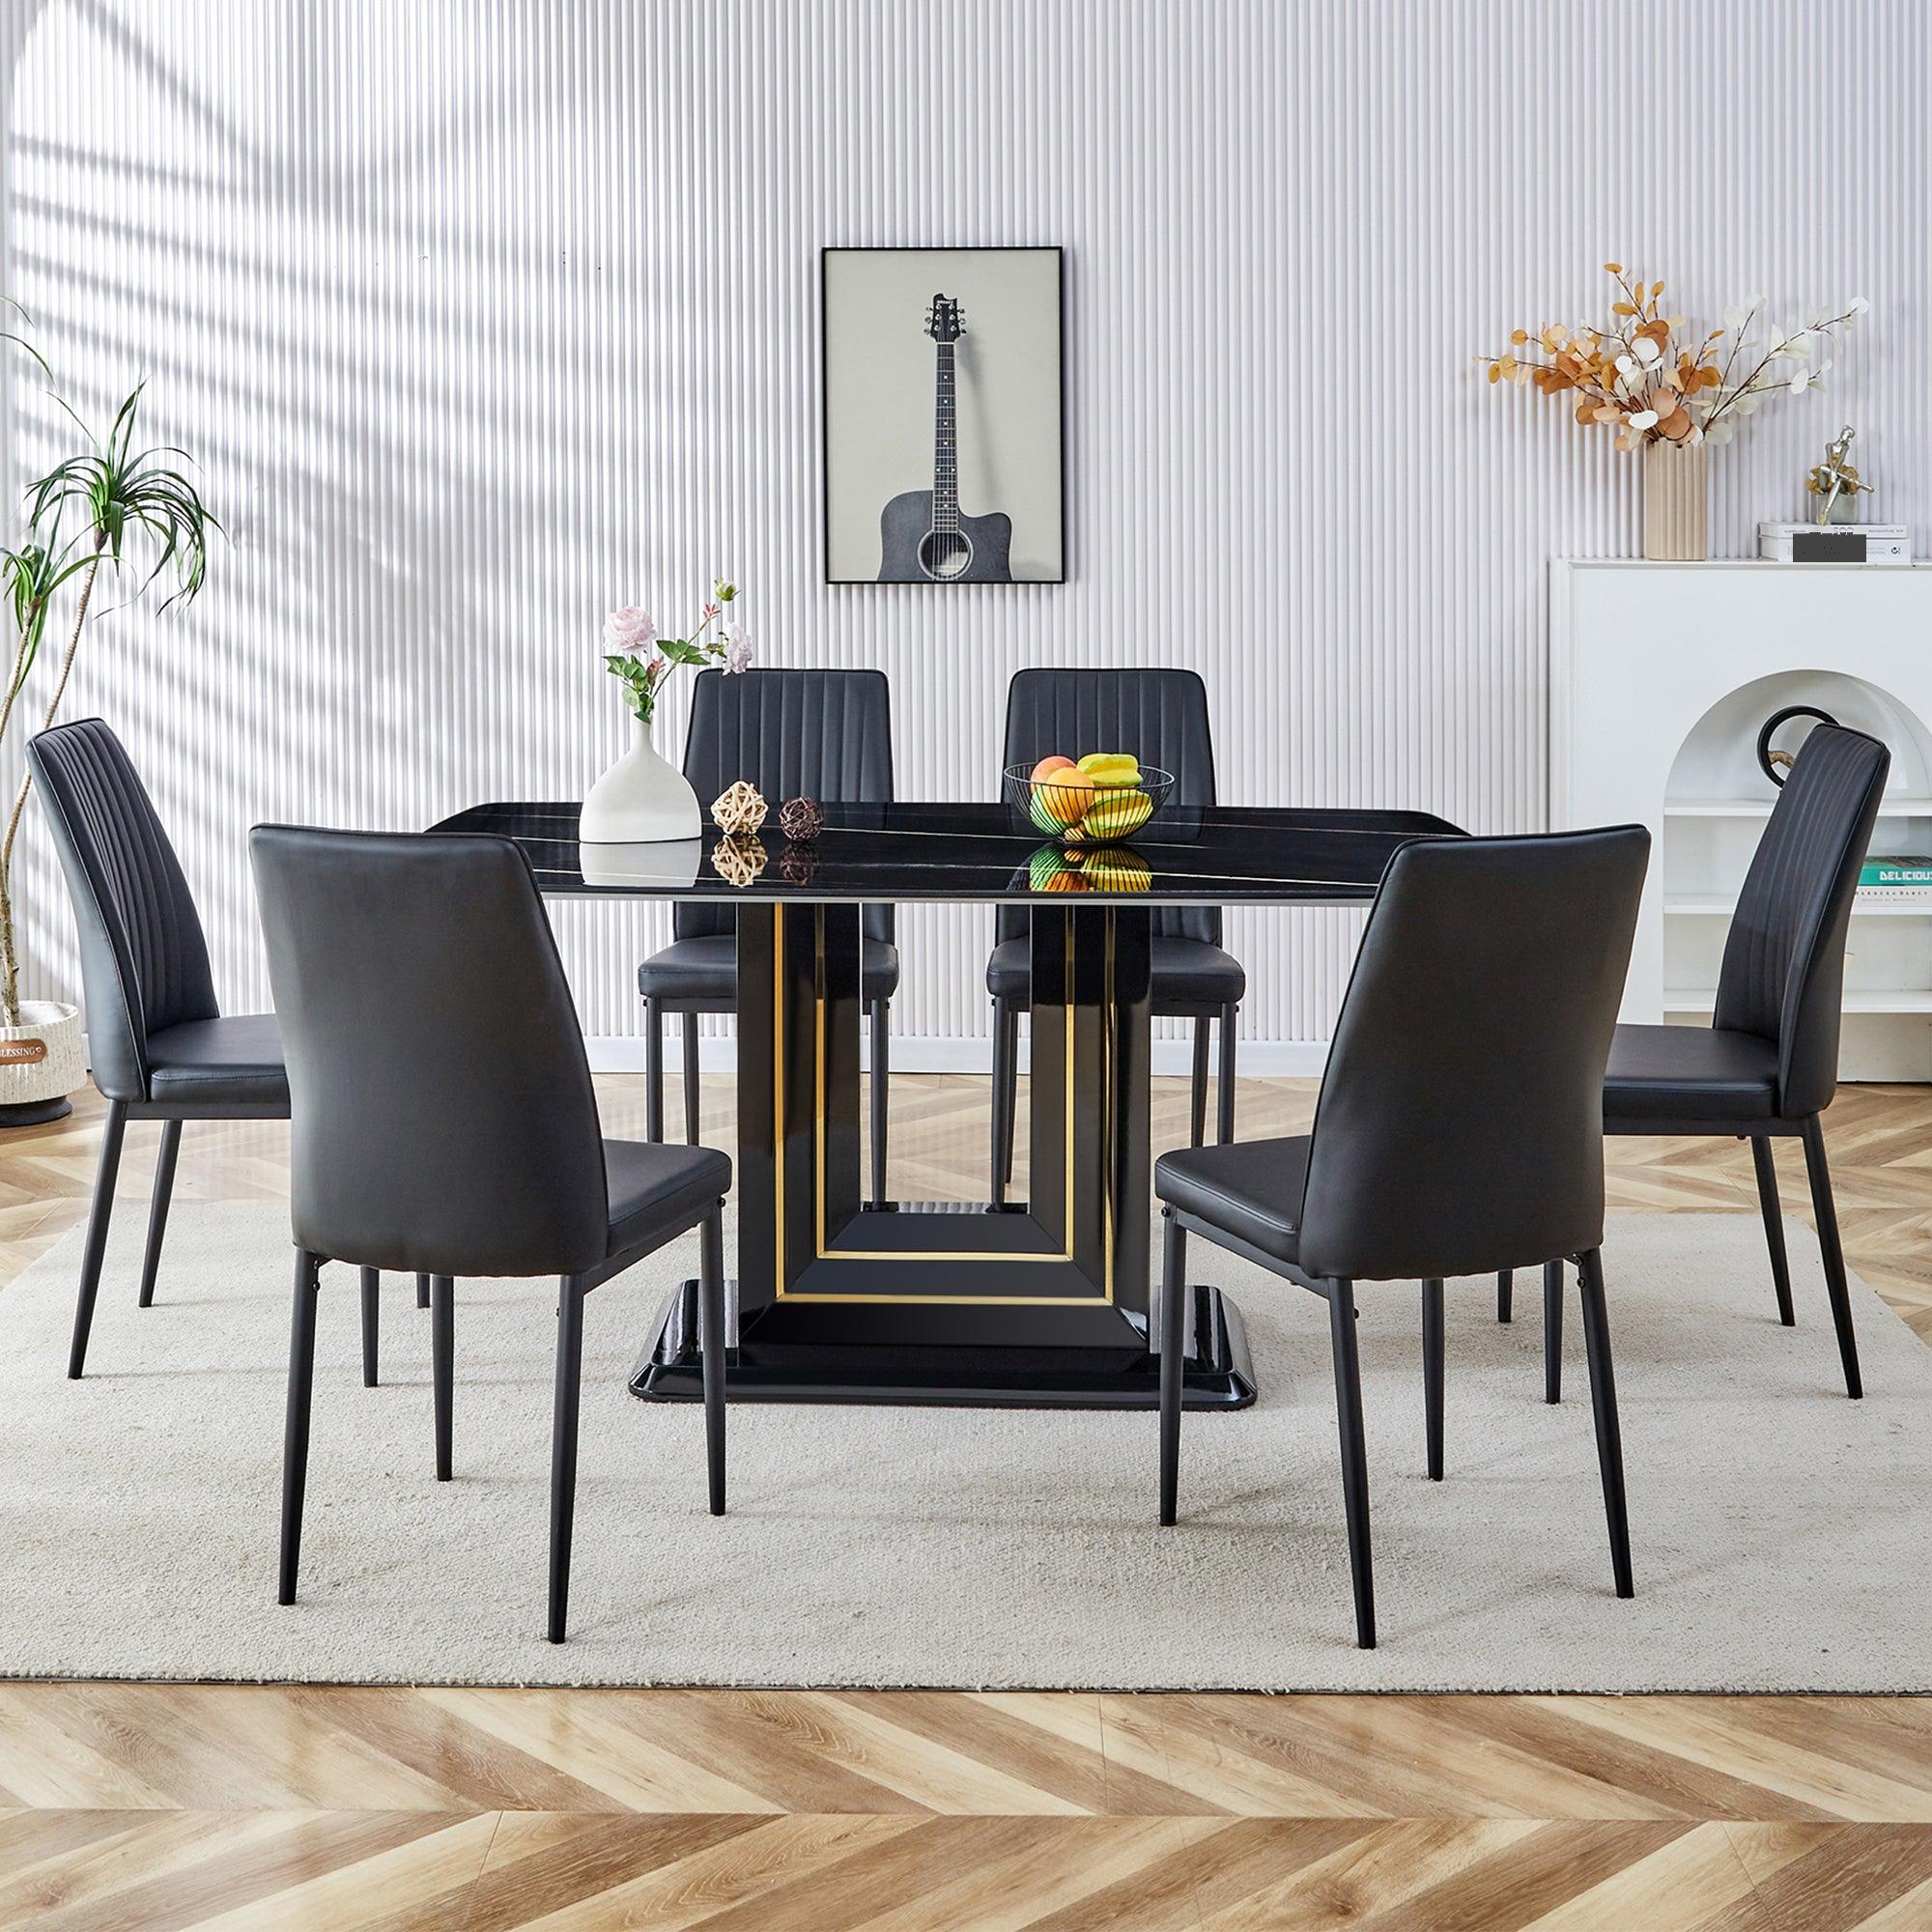 🆓🚛 7-Piece Dining Set, Modern Faux Marble Black Glass Rectangular Dining Room Table With Mdf Base, 6 Black Dining Chairs